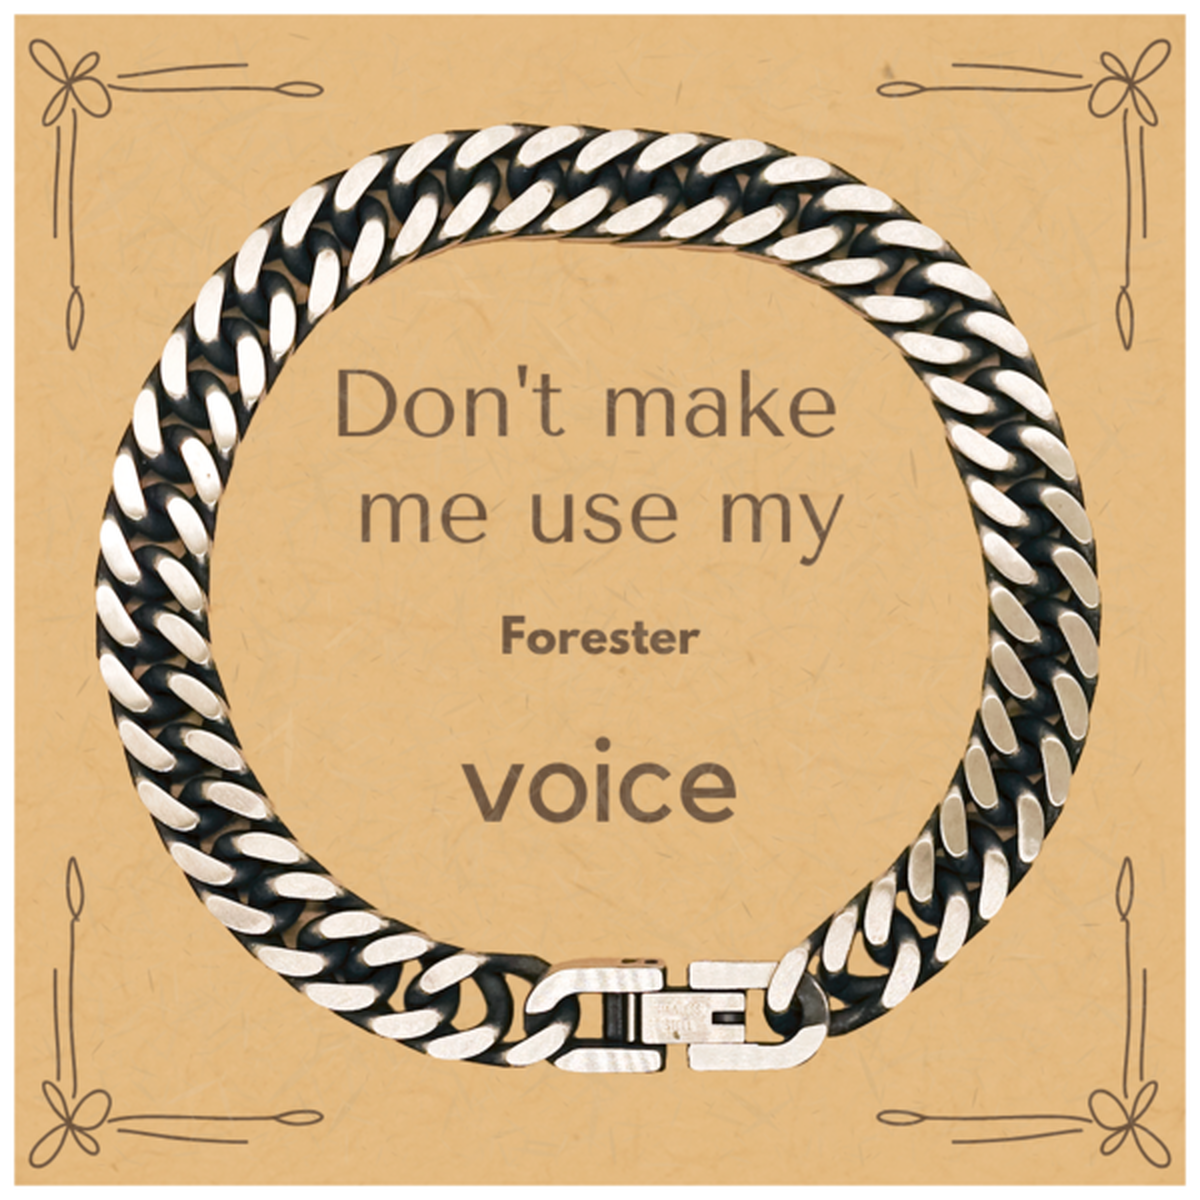 Don't make me use my Forester voice, Sarcasm Forester Card Gifts, Christmas Forester Cuban Link Chain Bracelet Birthday Unique Gifts For Forester Coworkers, Men, Women, Colleague, Friends